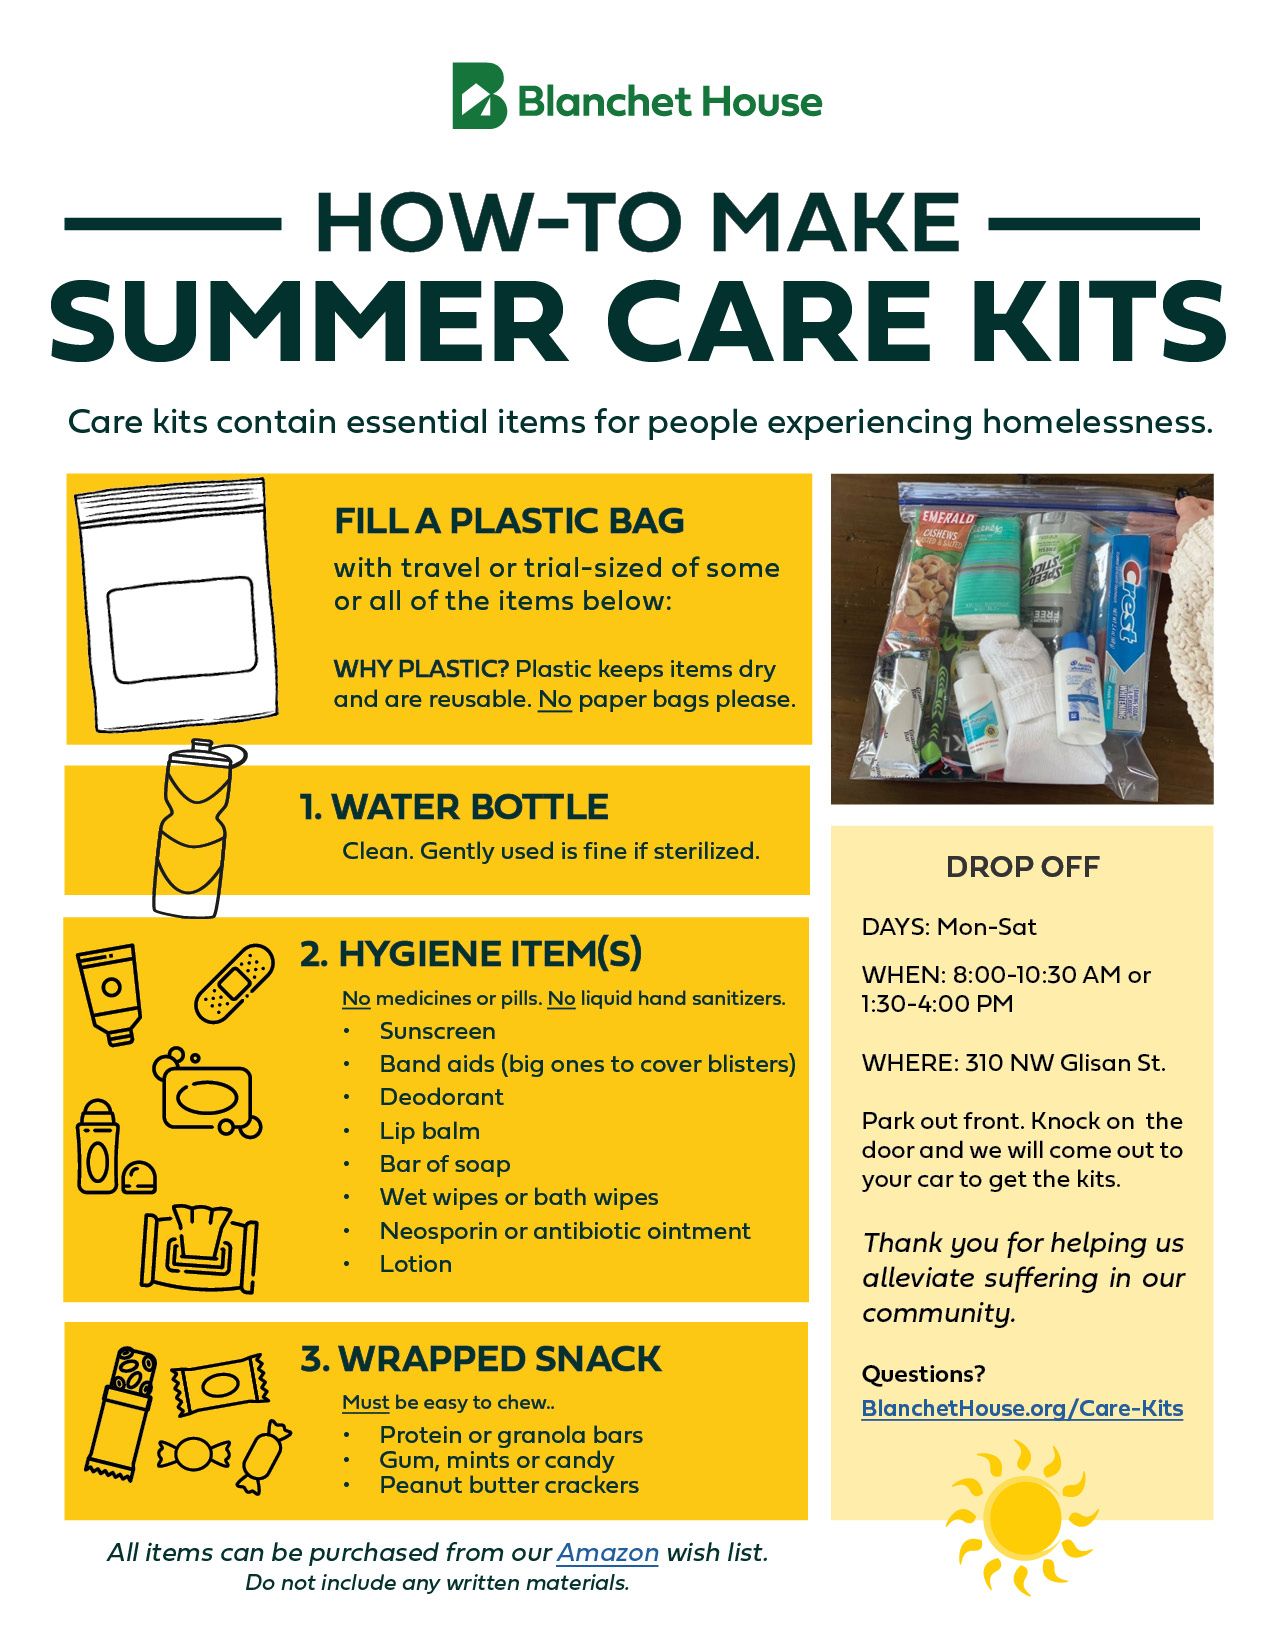 Summer Care Kit How-To guide.